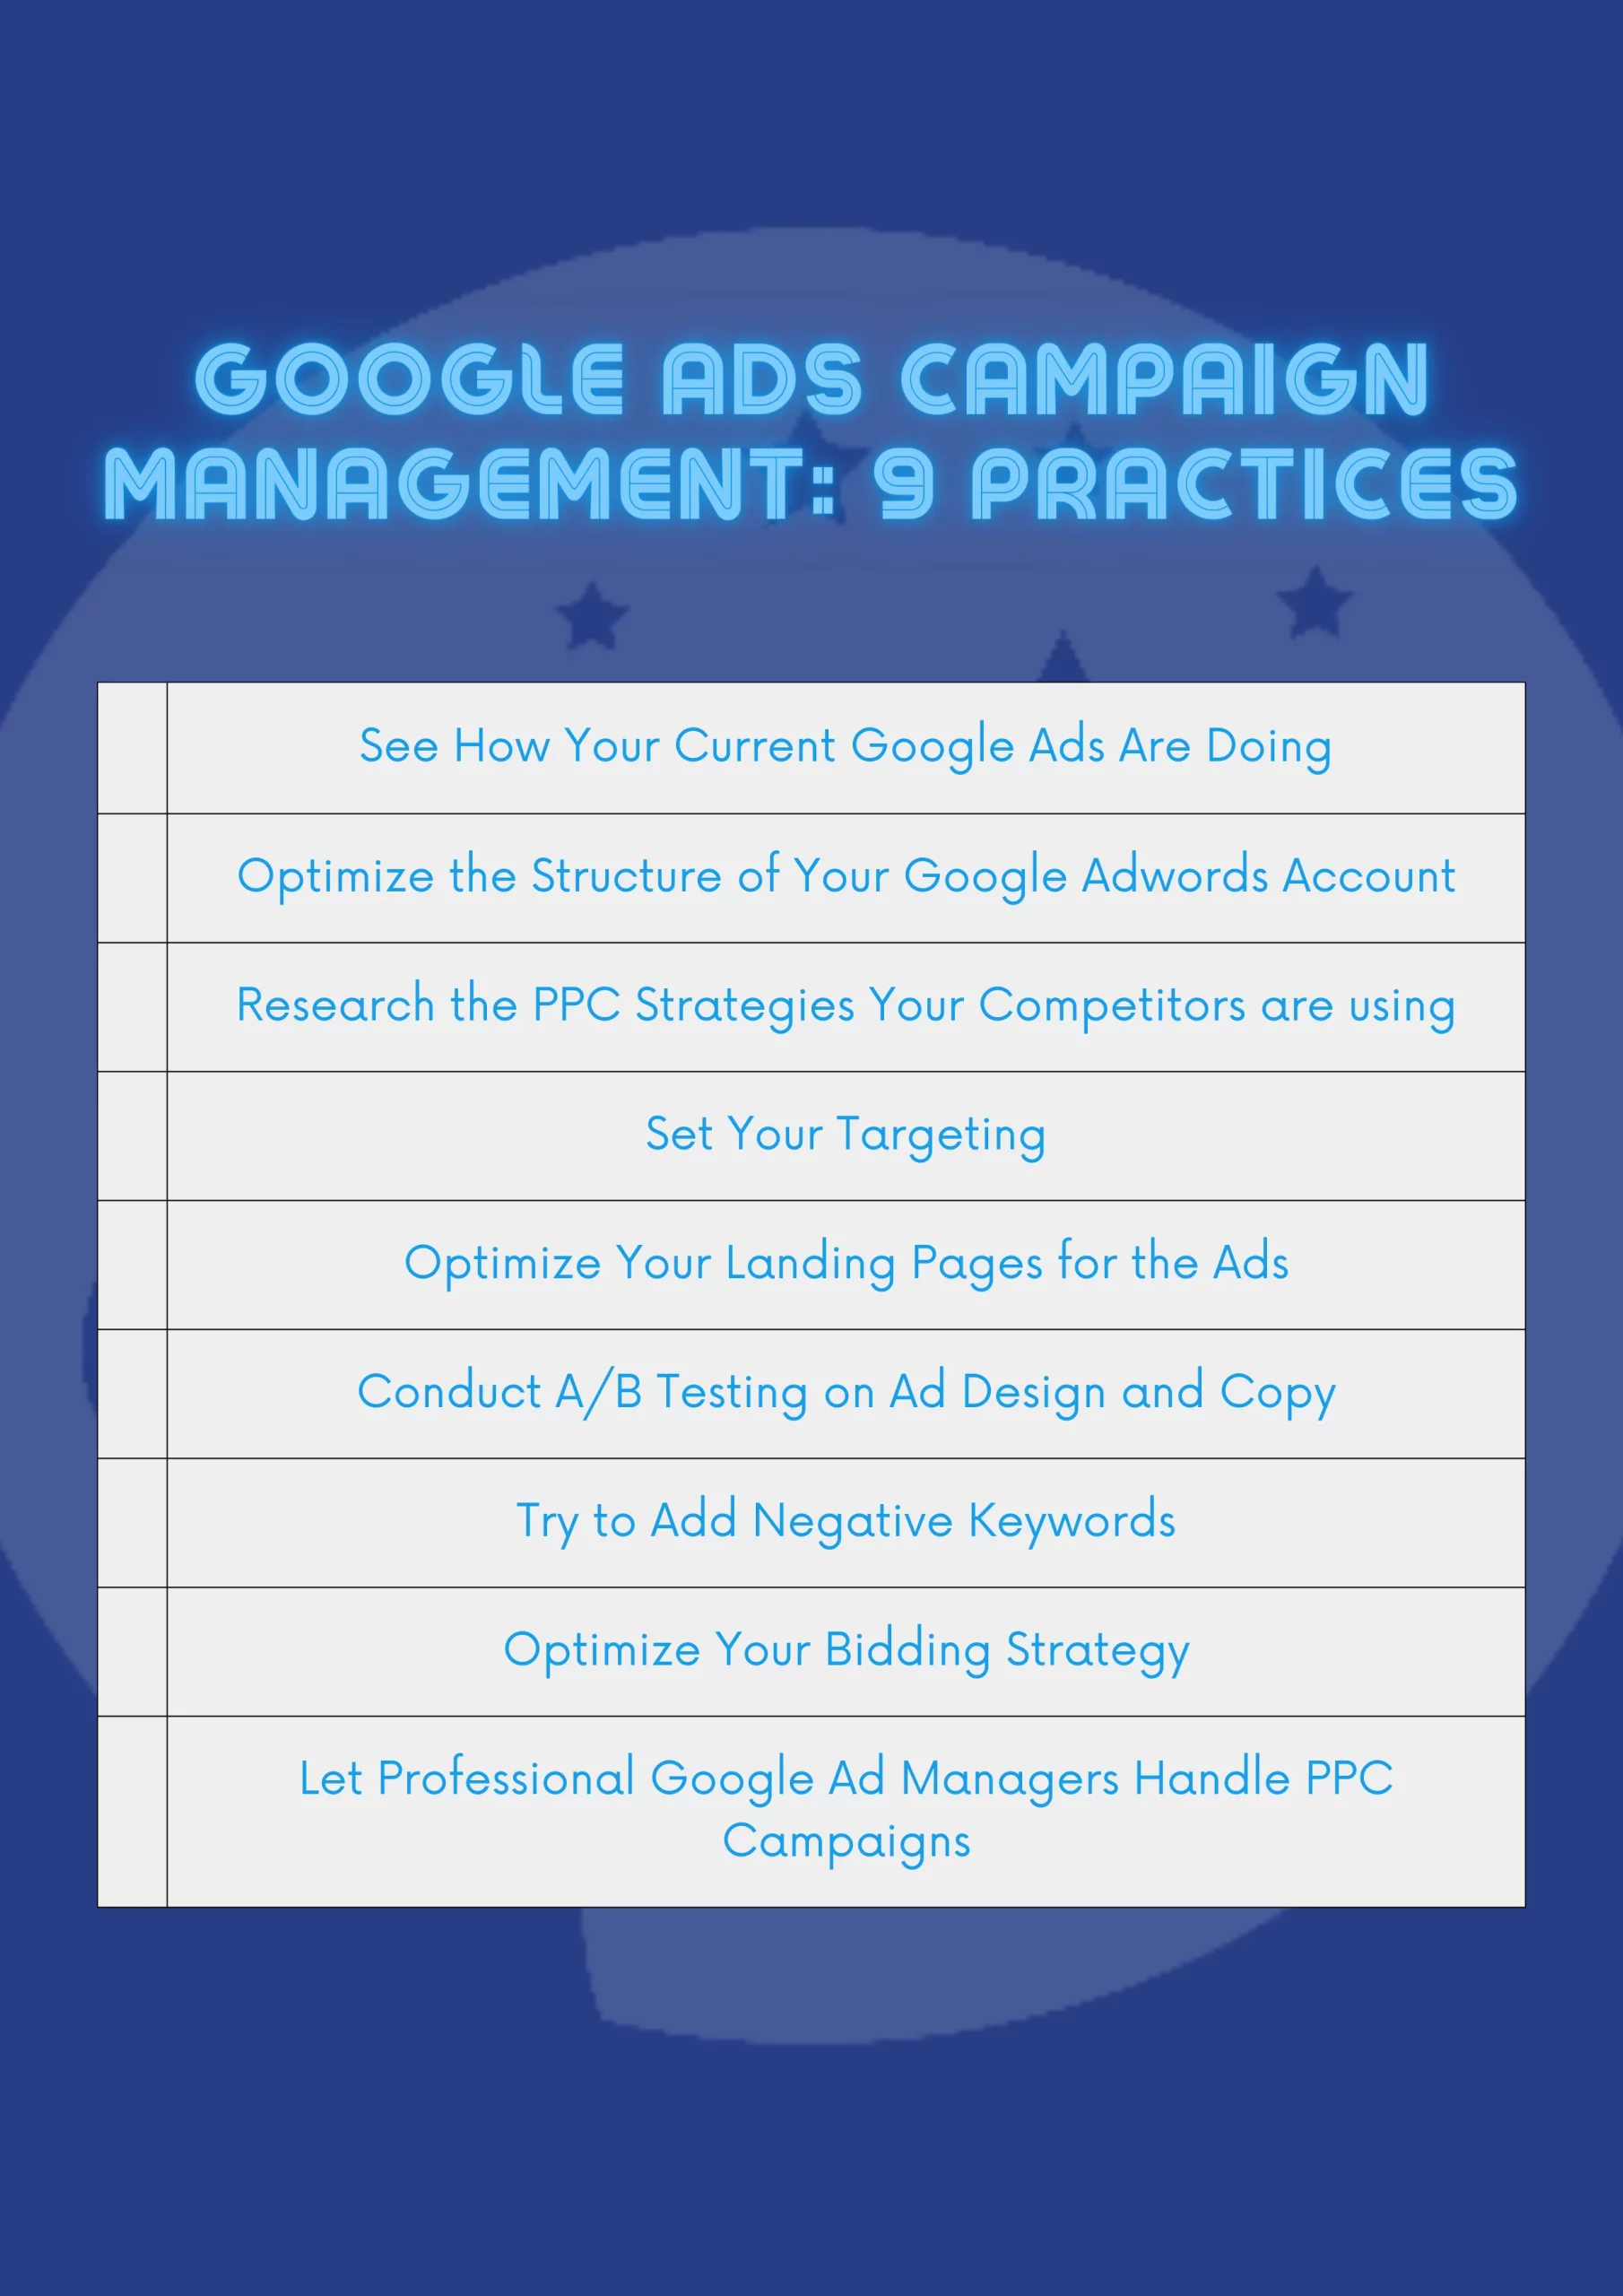 An infographic on the best practices for Google Ads management